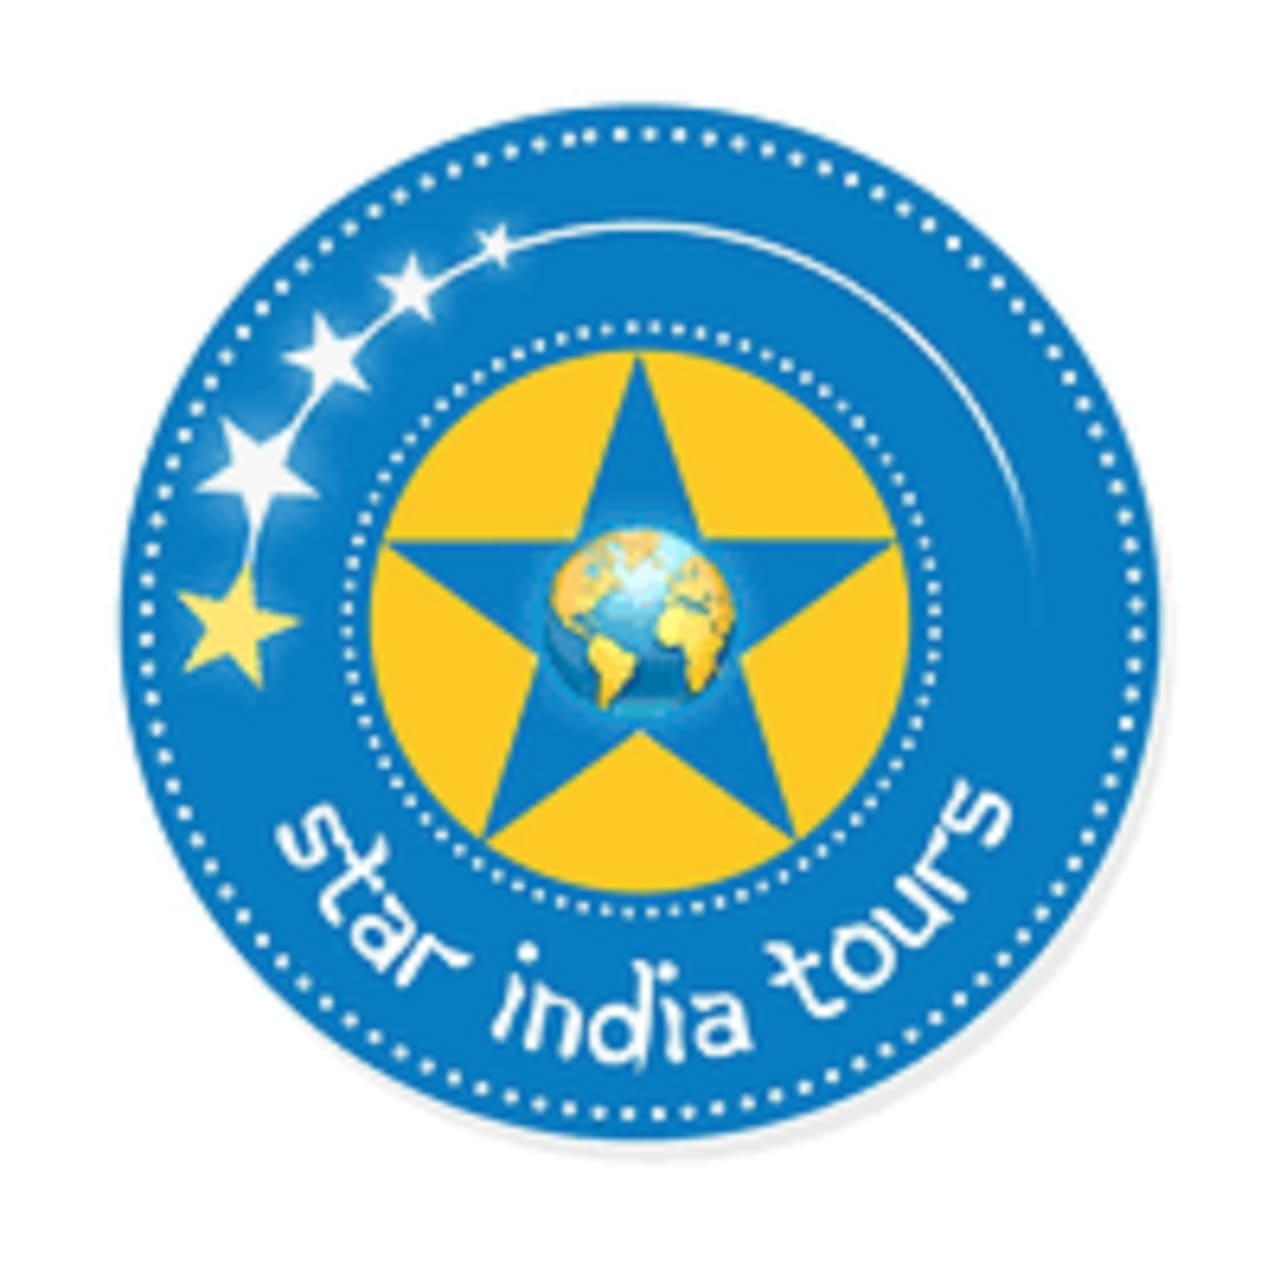 Best Places to Visit in India, Popular Holiday Destinations | Star India Tours